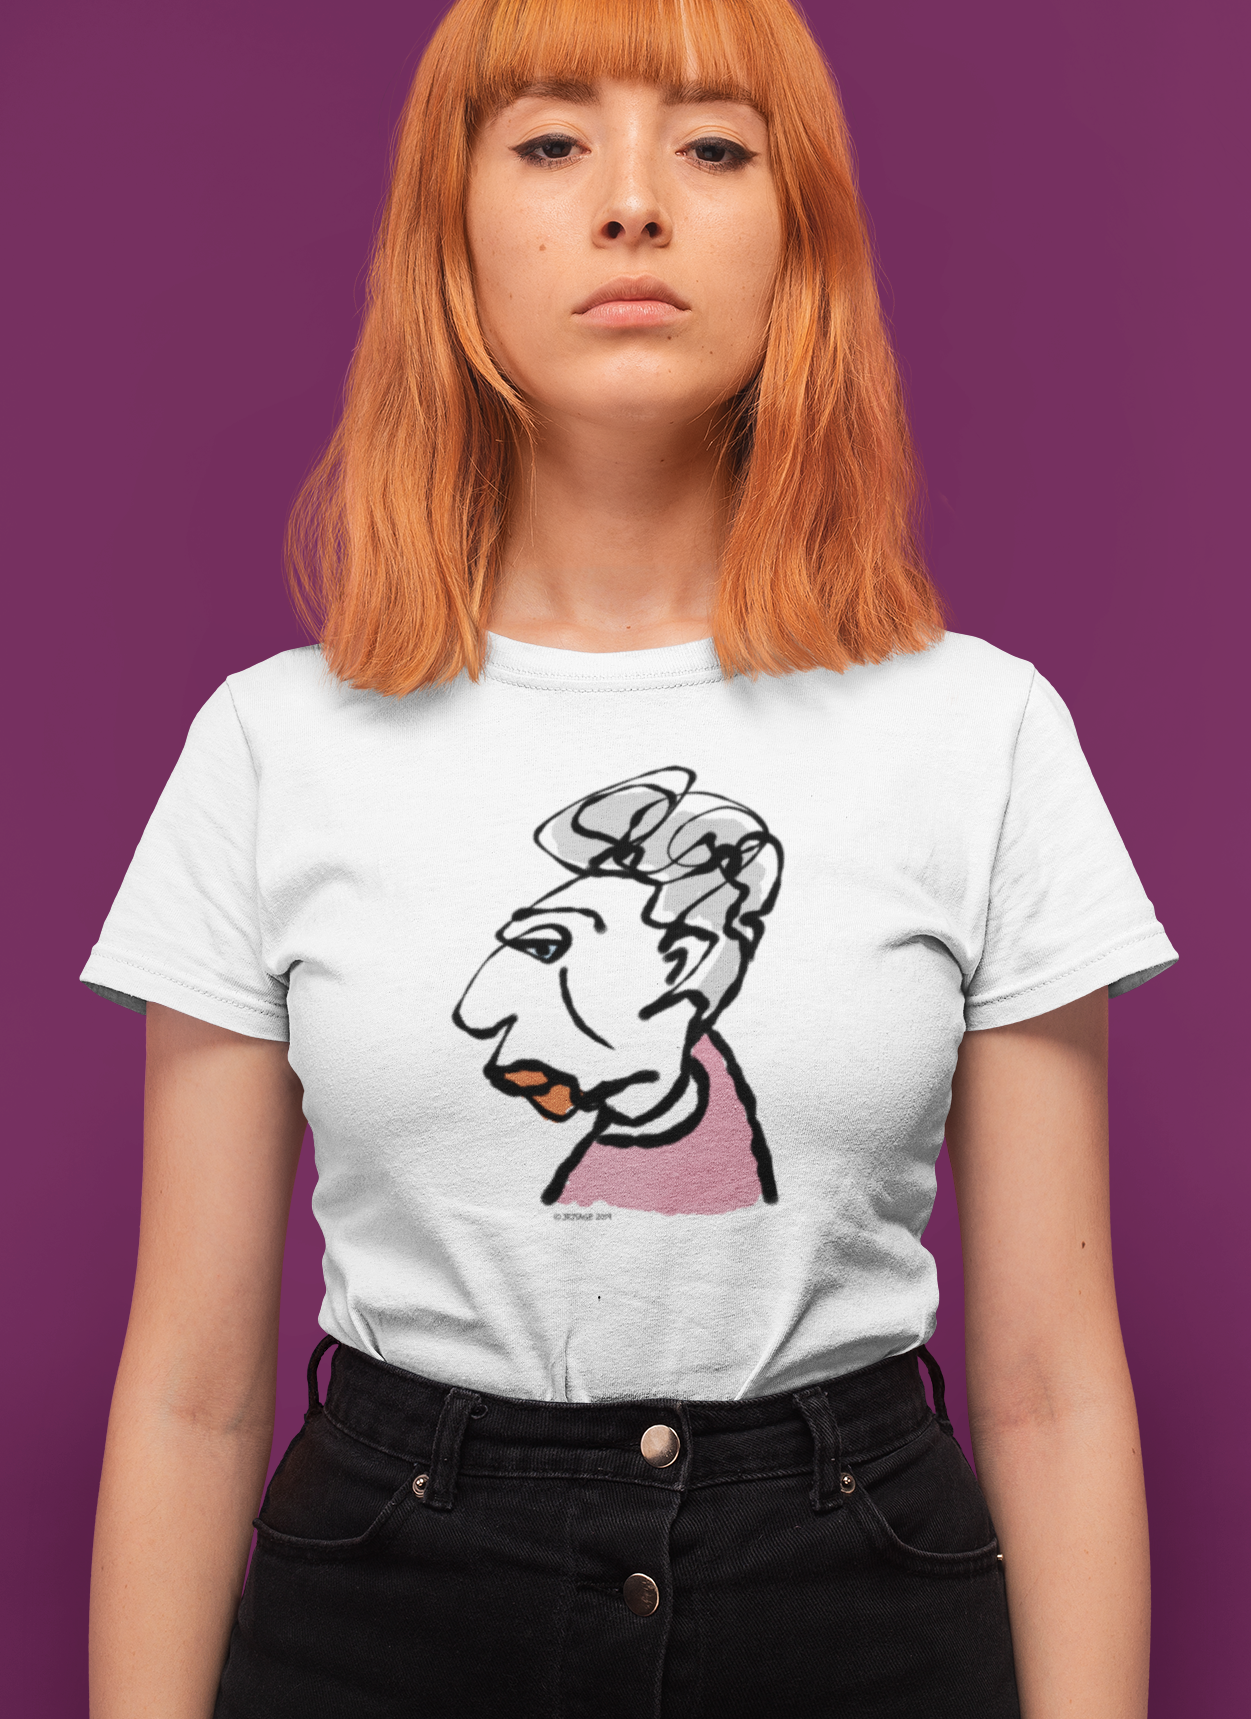 Glamorous Granny T-shirt - Young woman wearing illustrated Glamorous Granny T-shirt on classic white by Hector and Bone